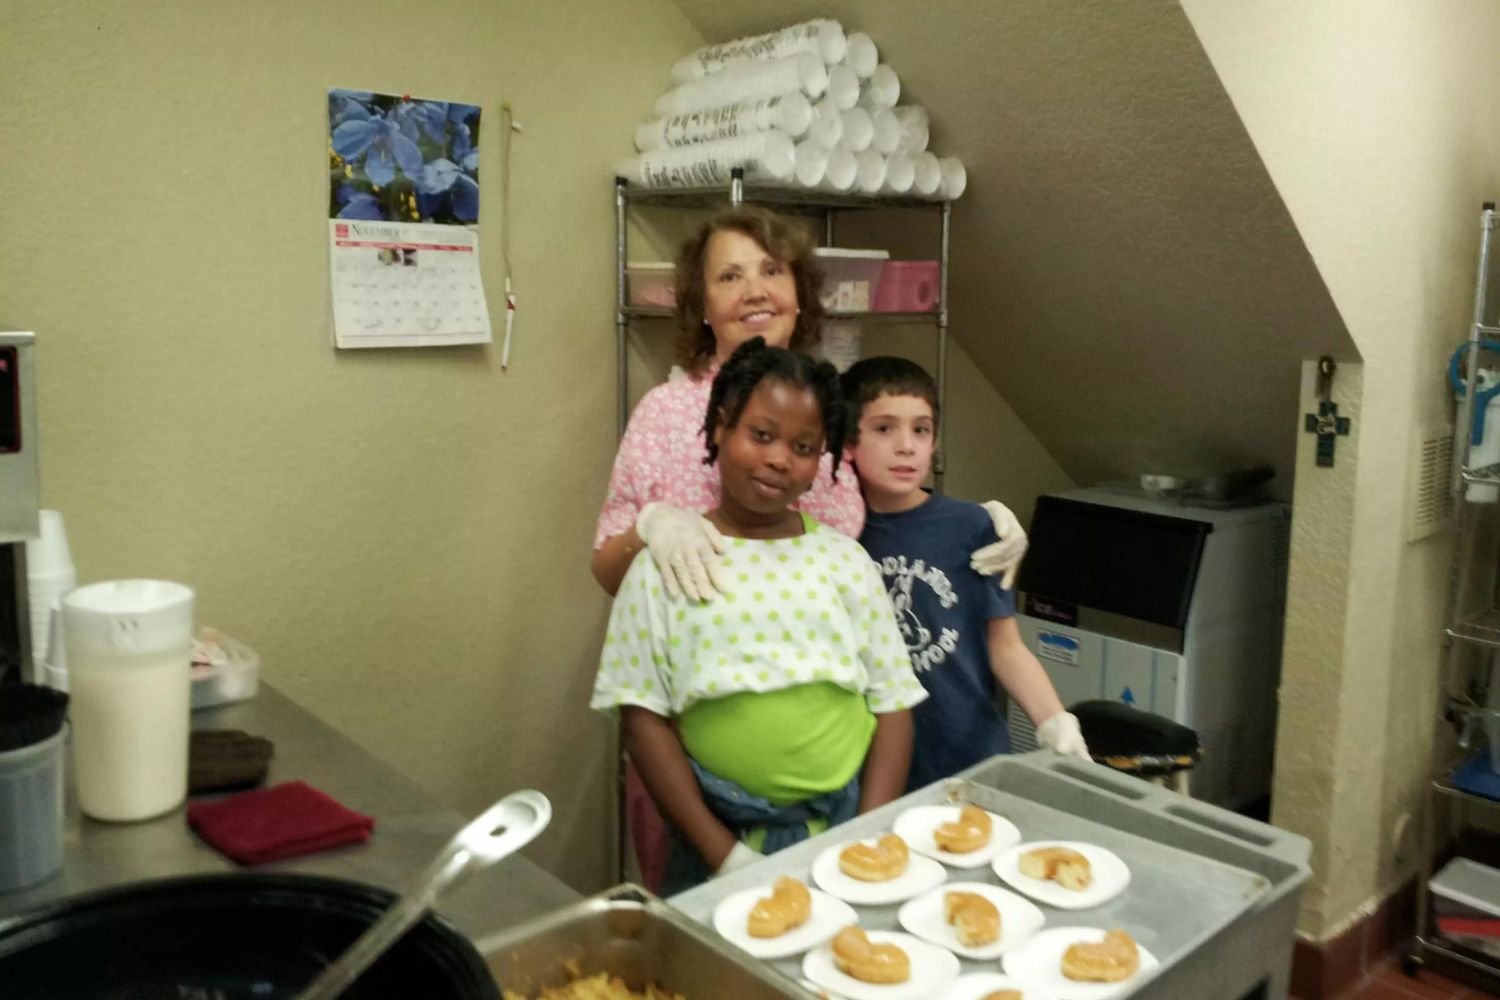 Children volunteering in the kitchen of Our Father's House Soup Kitchen.